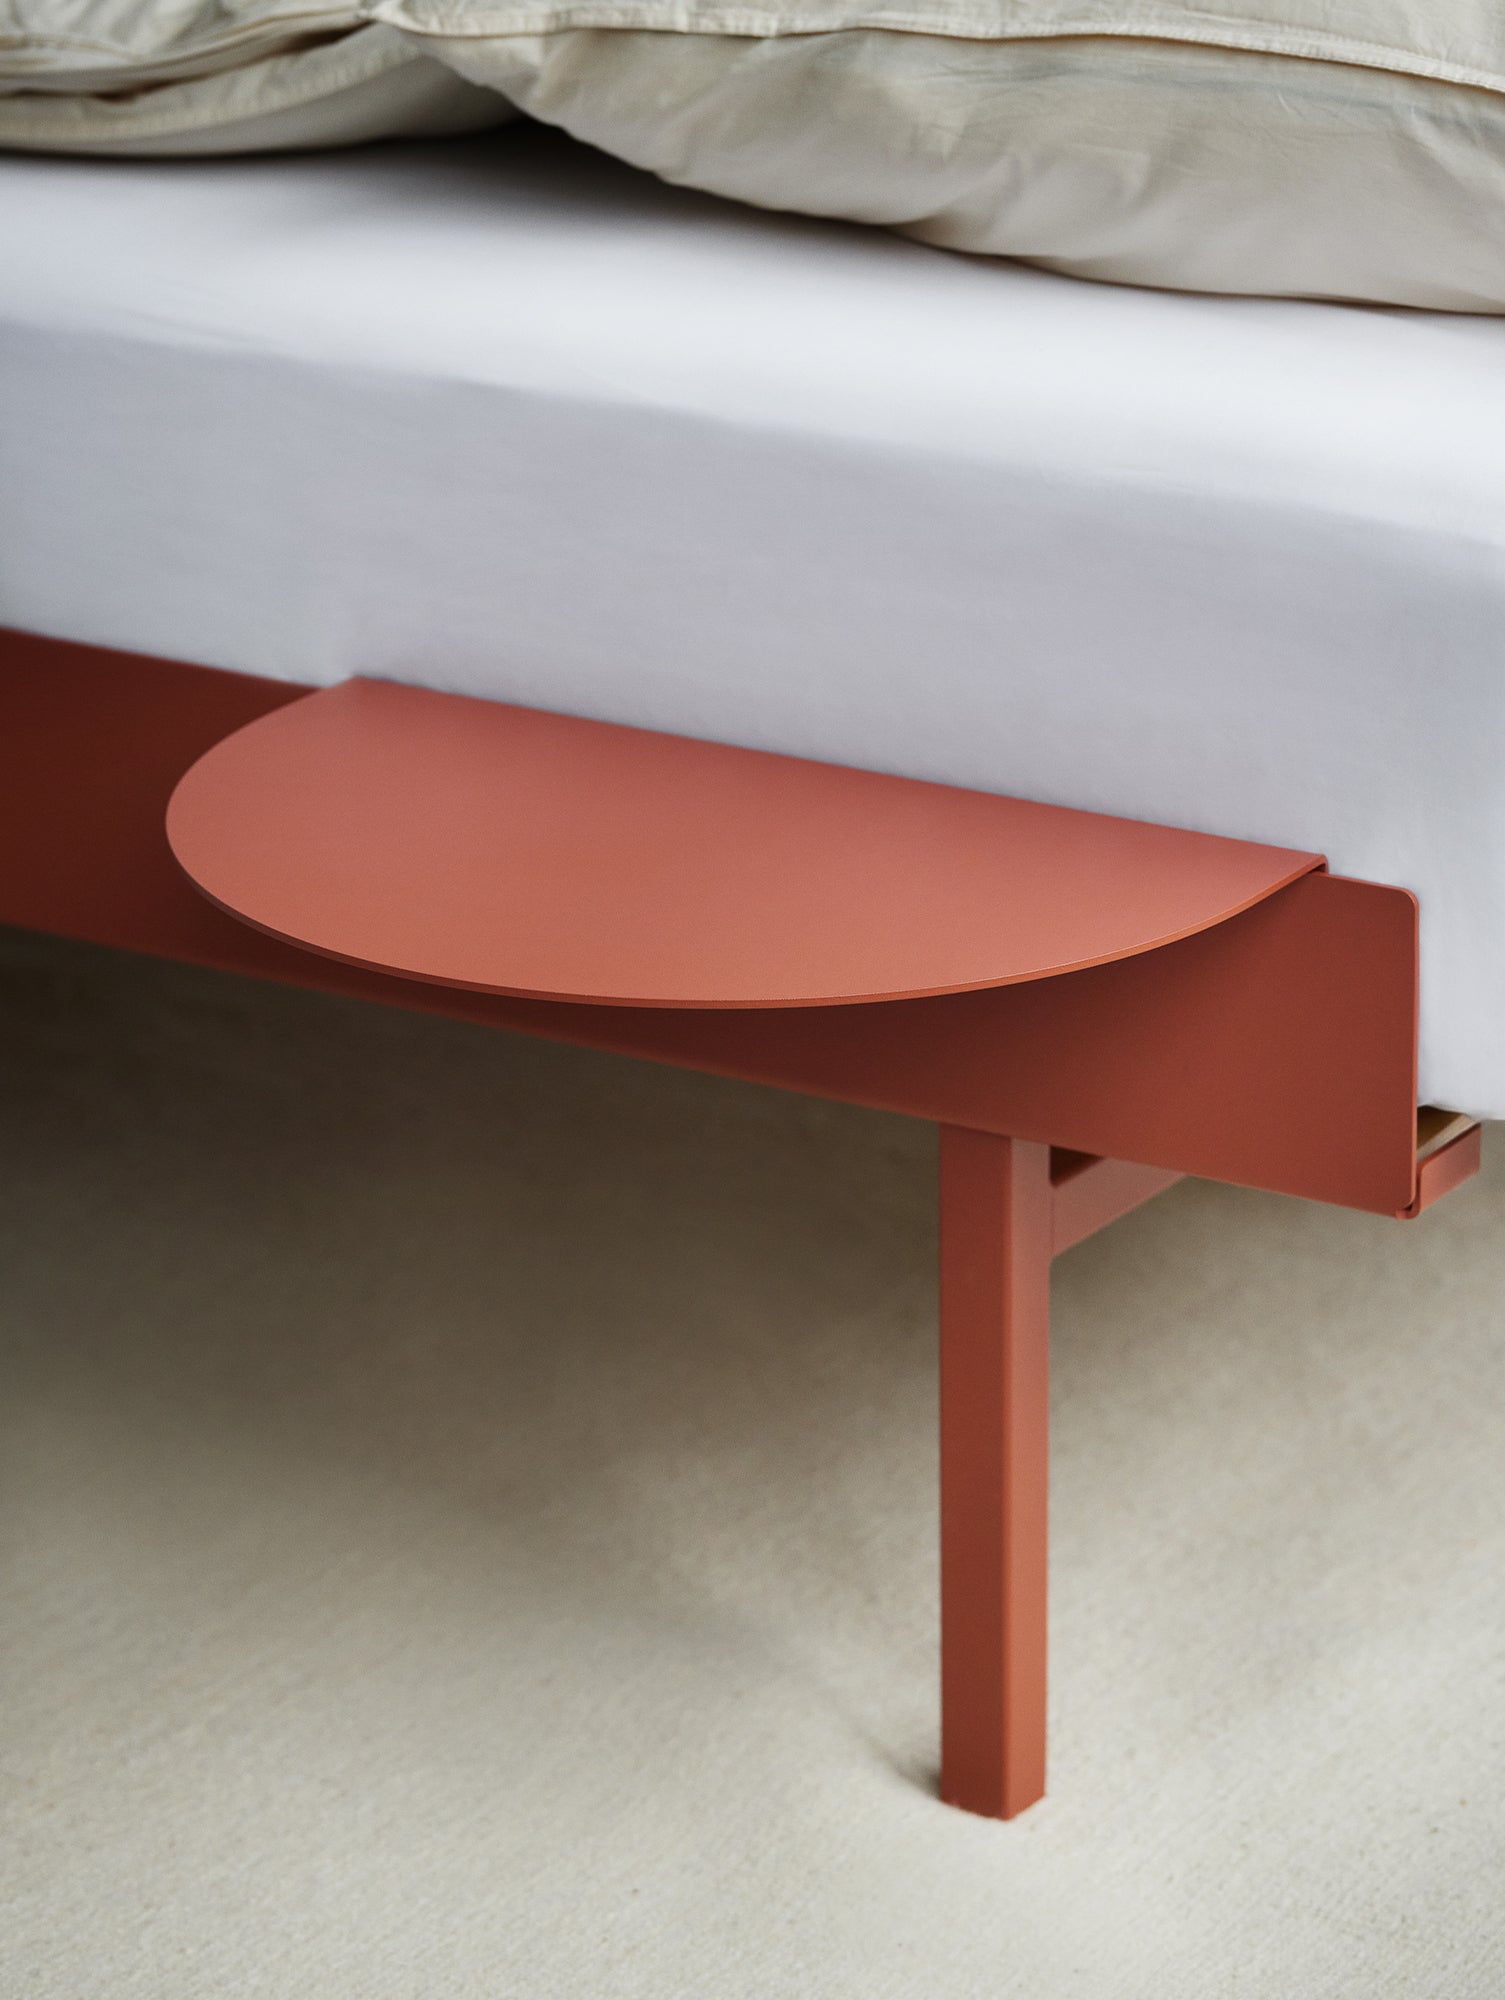 Bed 90 - 180 cm (High) by Moebe- Terracotta